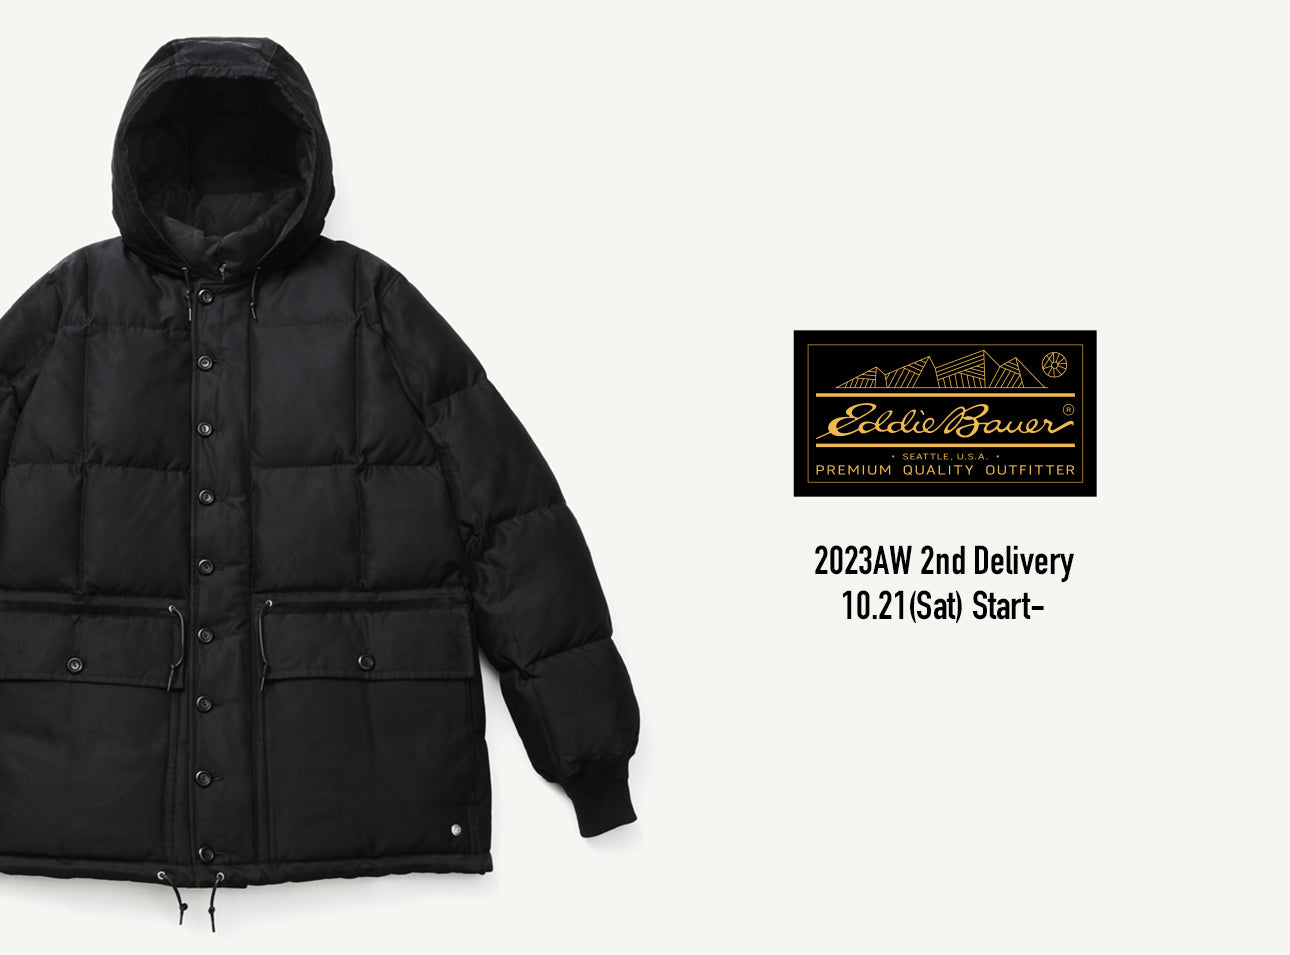 EDDIE BAUER BLACK TAG COLLECTION 2023 AW 2nd DELIVERY